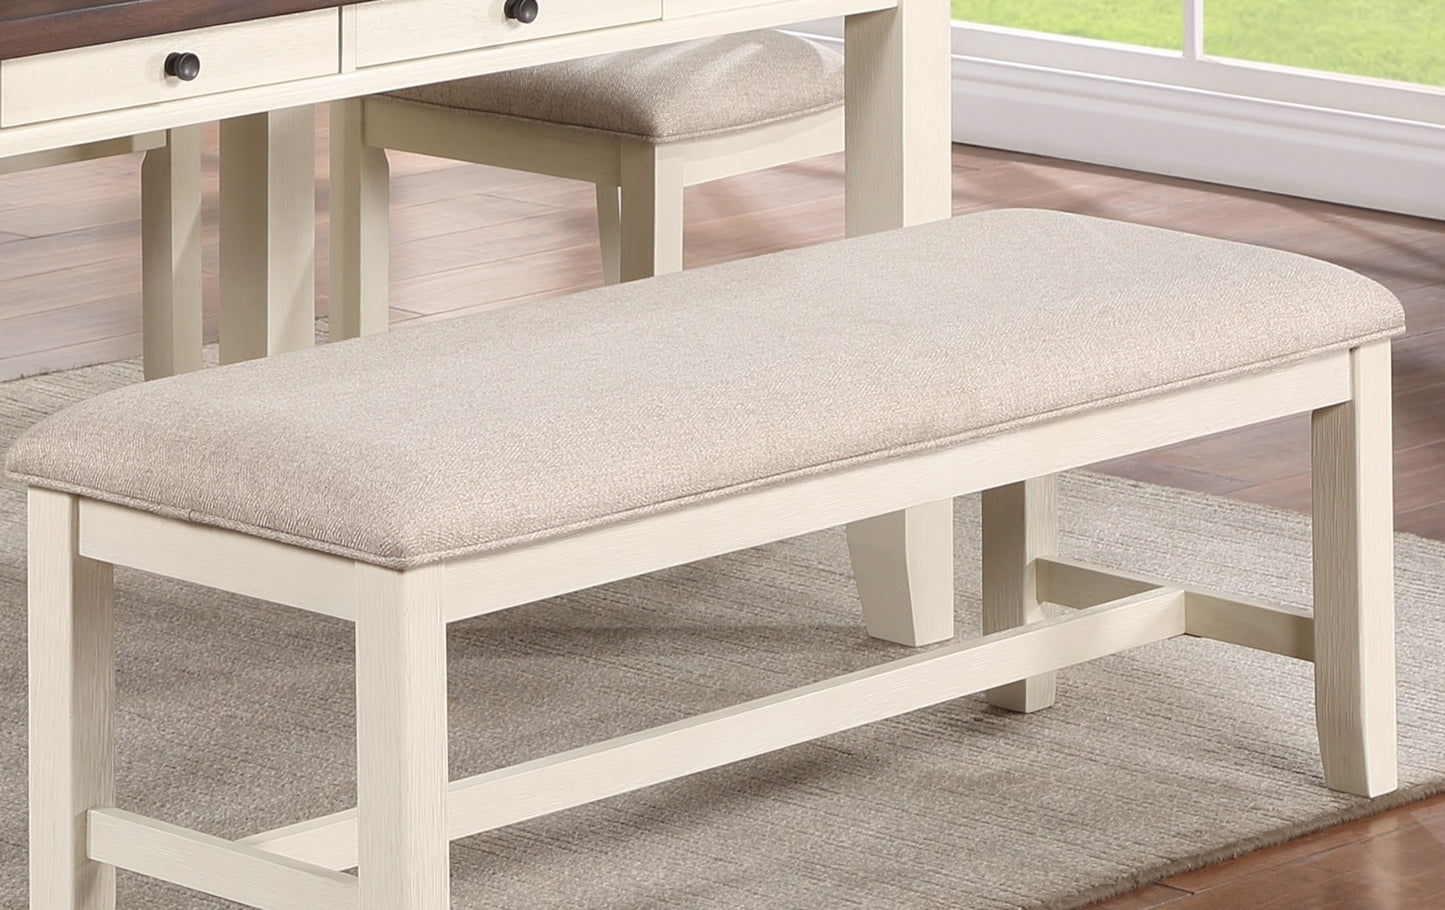 White Classic 1PC BENCH Rubberwood Beige Fabric Cushion Seats Dining Room Furniture Bench